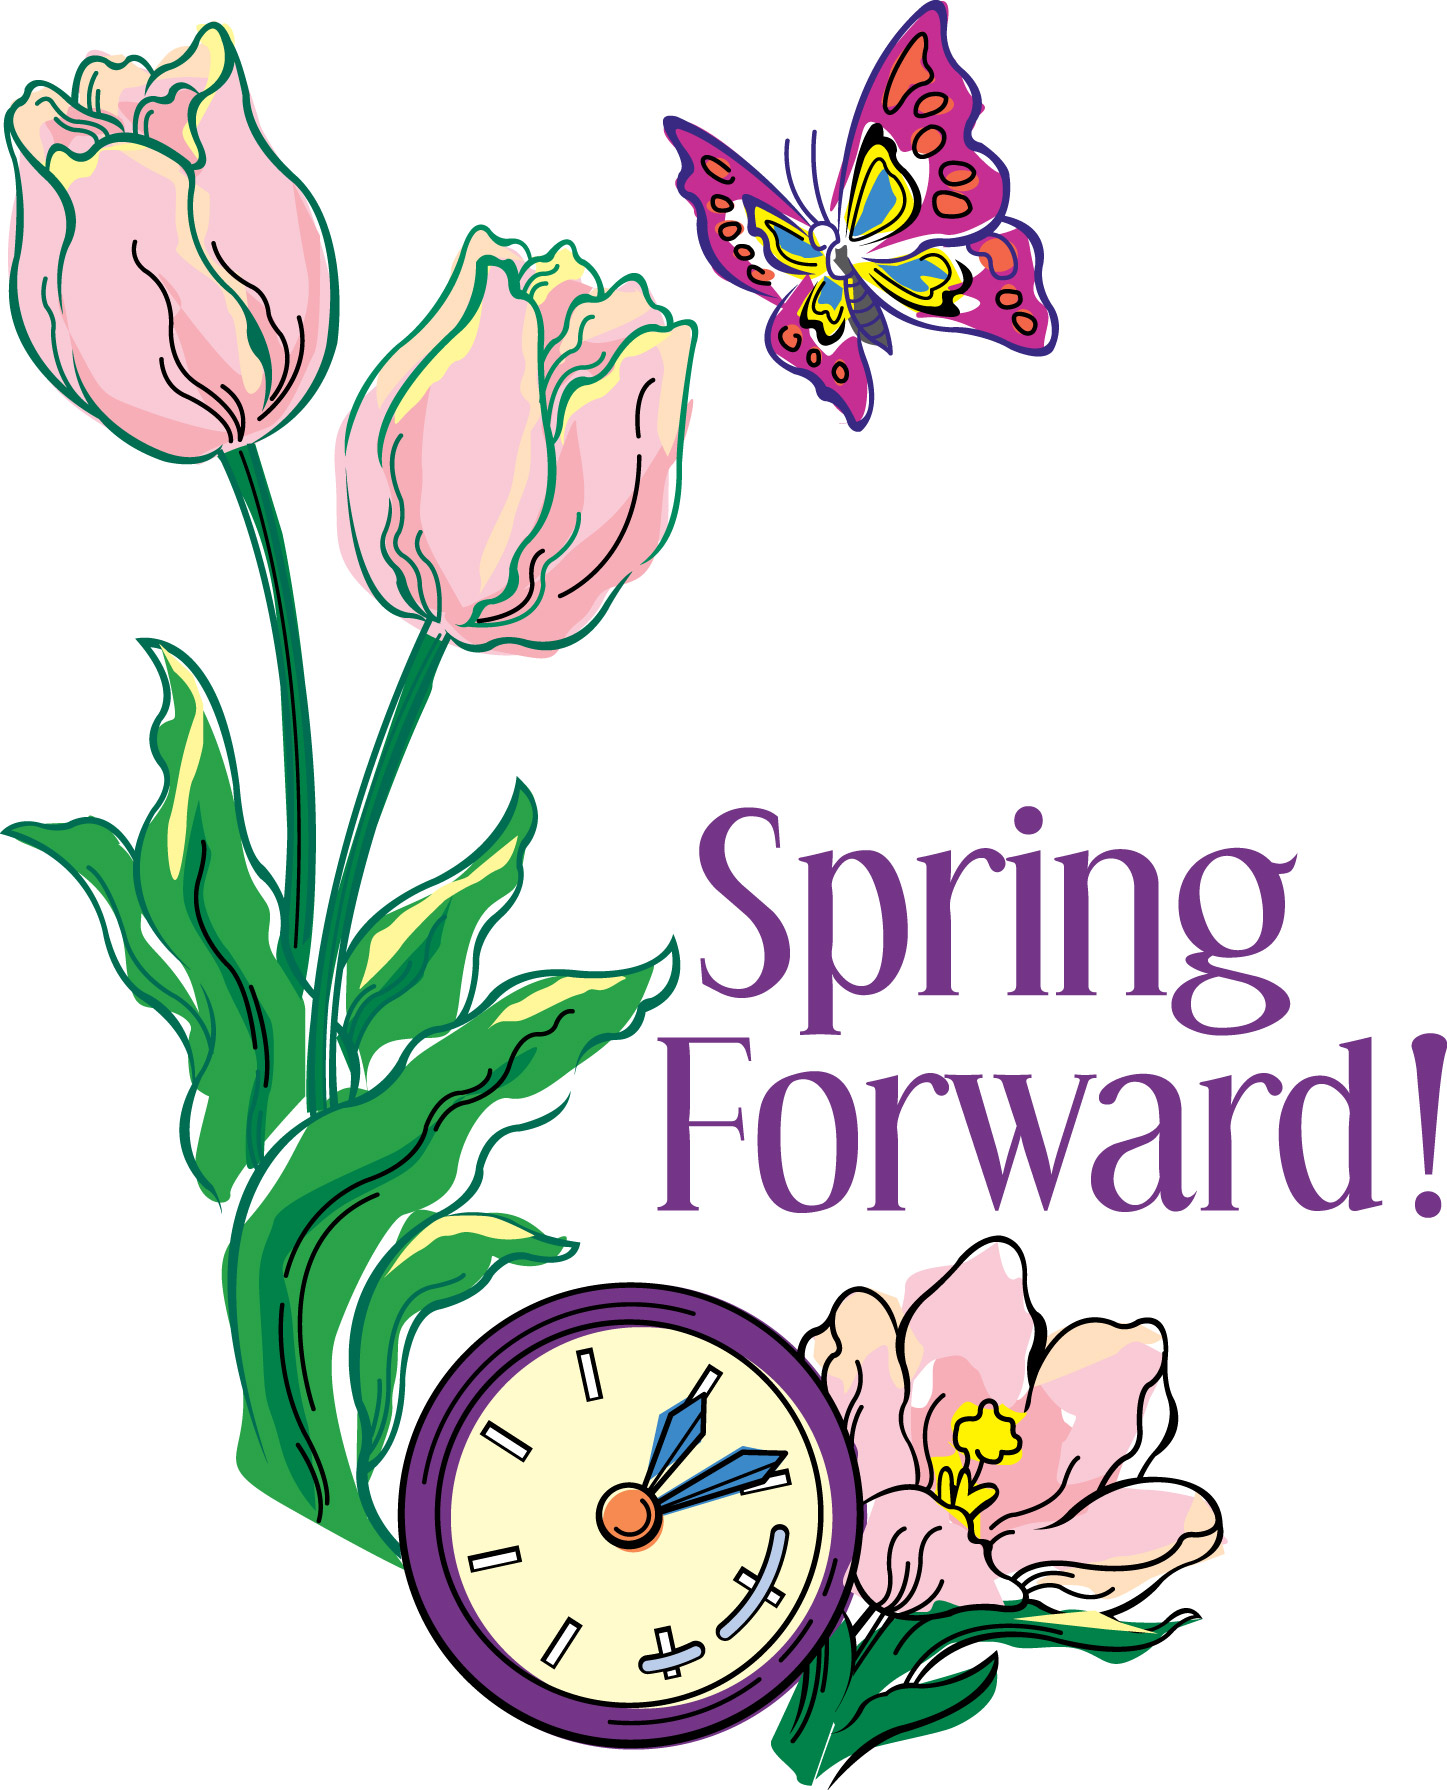 REMINDER DAYLIGHT SAVINGS TIME BEGINS TOMORROW DFW Weather News and Blog